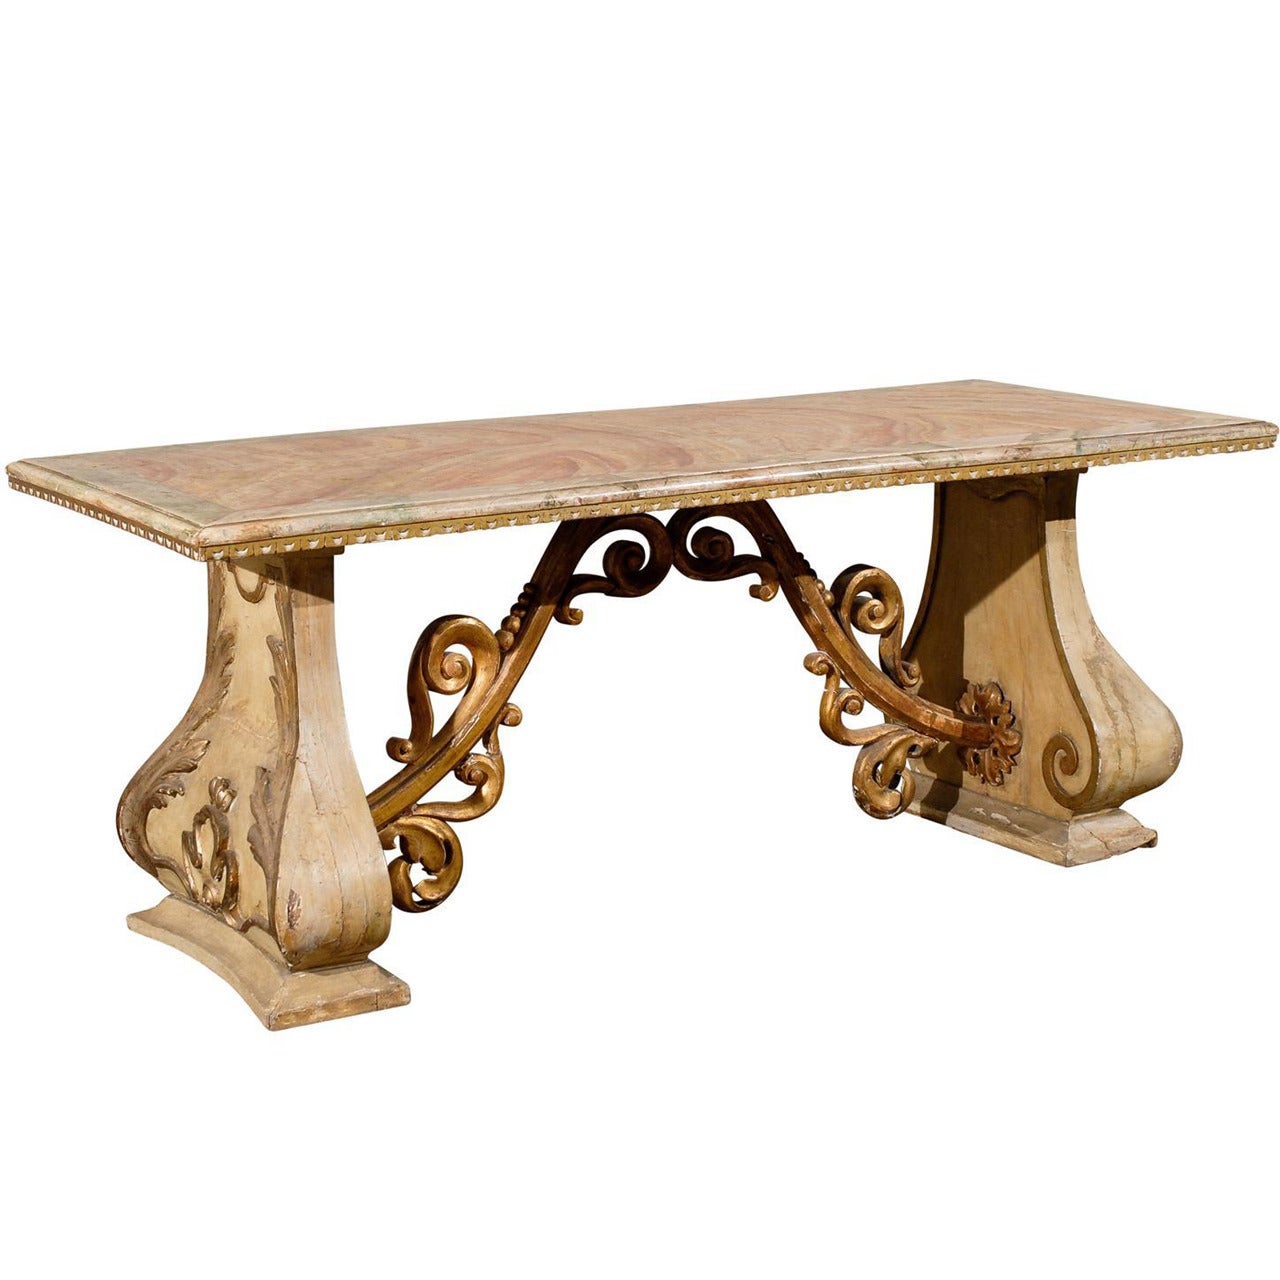 19th Century Italian Baroque Style Console Table with Faux Marble Top